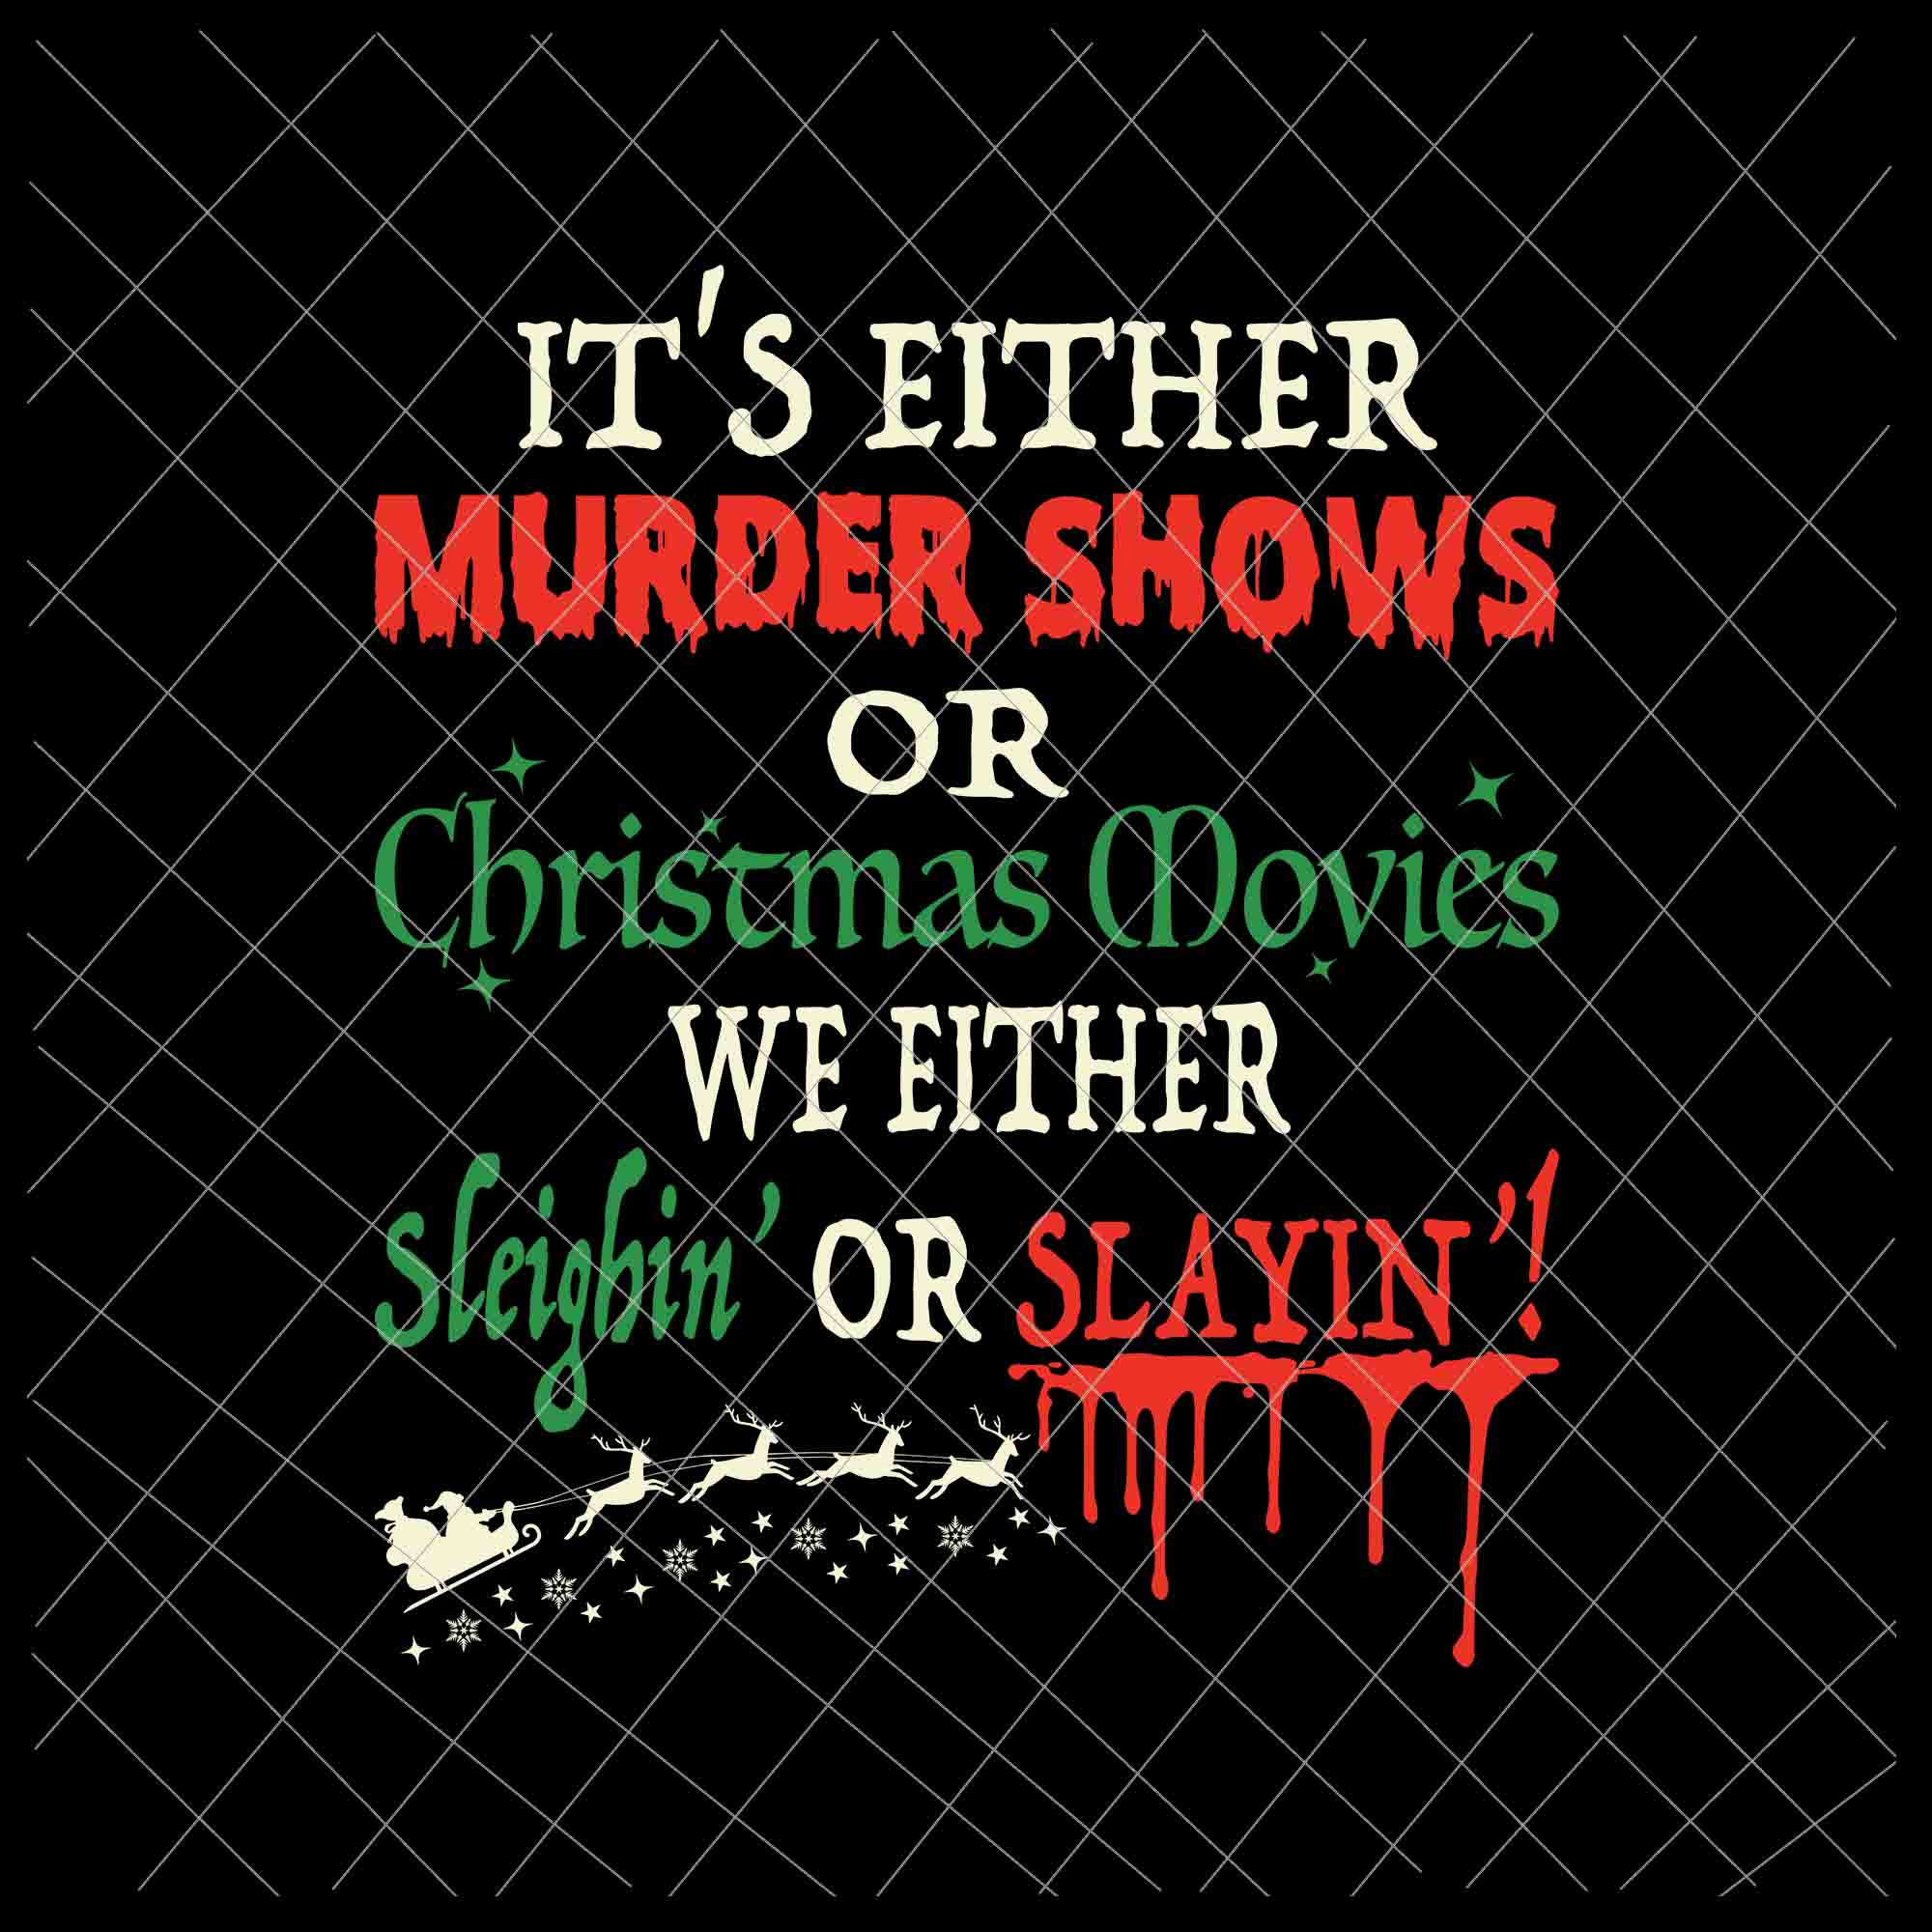 It’s either murder shows or christmas movies svg, we either sleighin' or slayin' svg, christmas movies svg, funny christmas svg